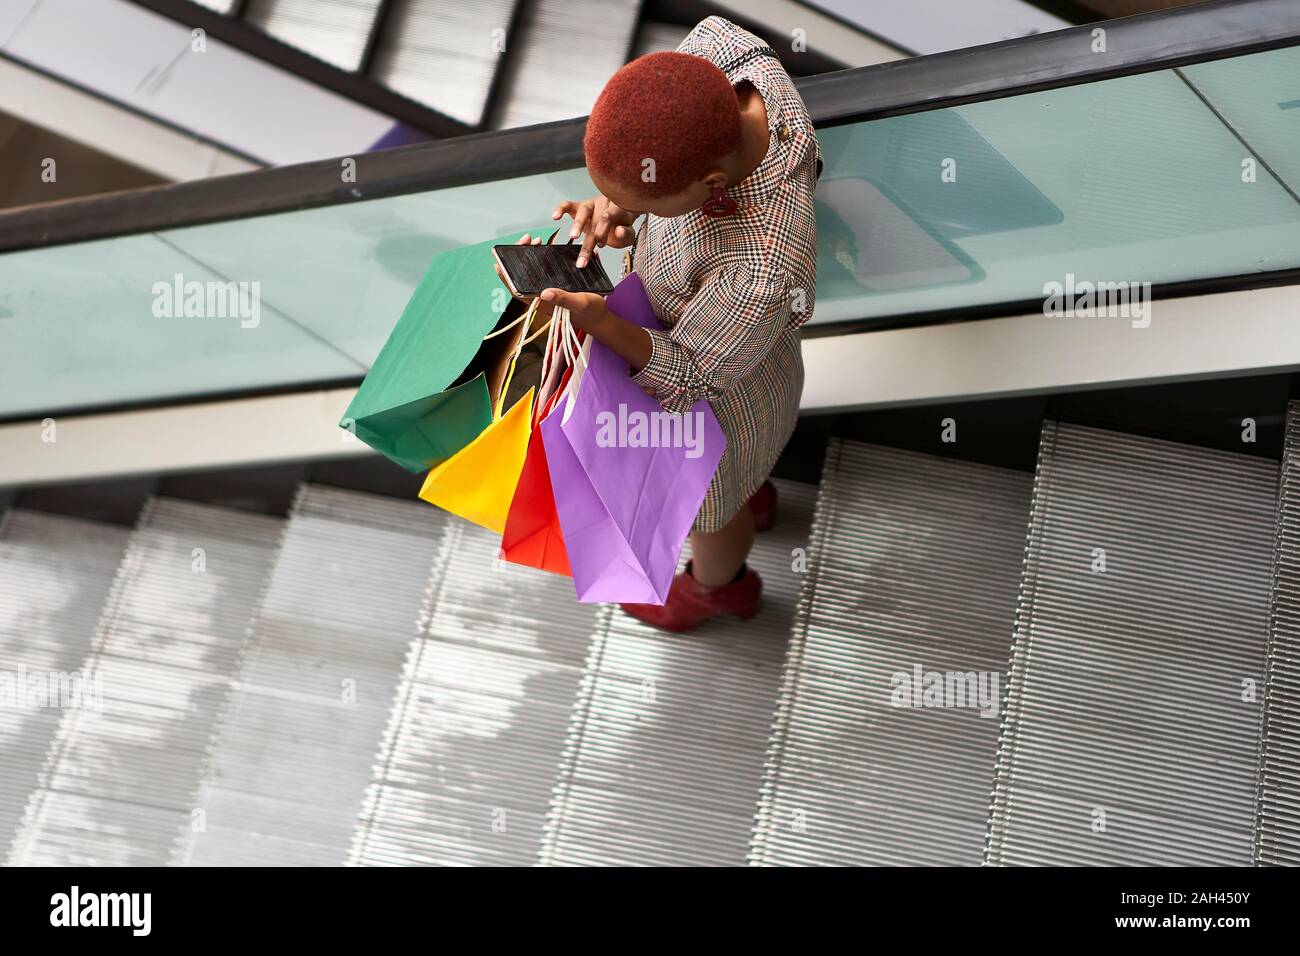 Young woman holding colorful shopping bags and checking her cell phone while descending the stairs Stock Photo